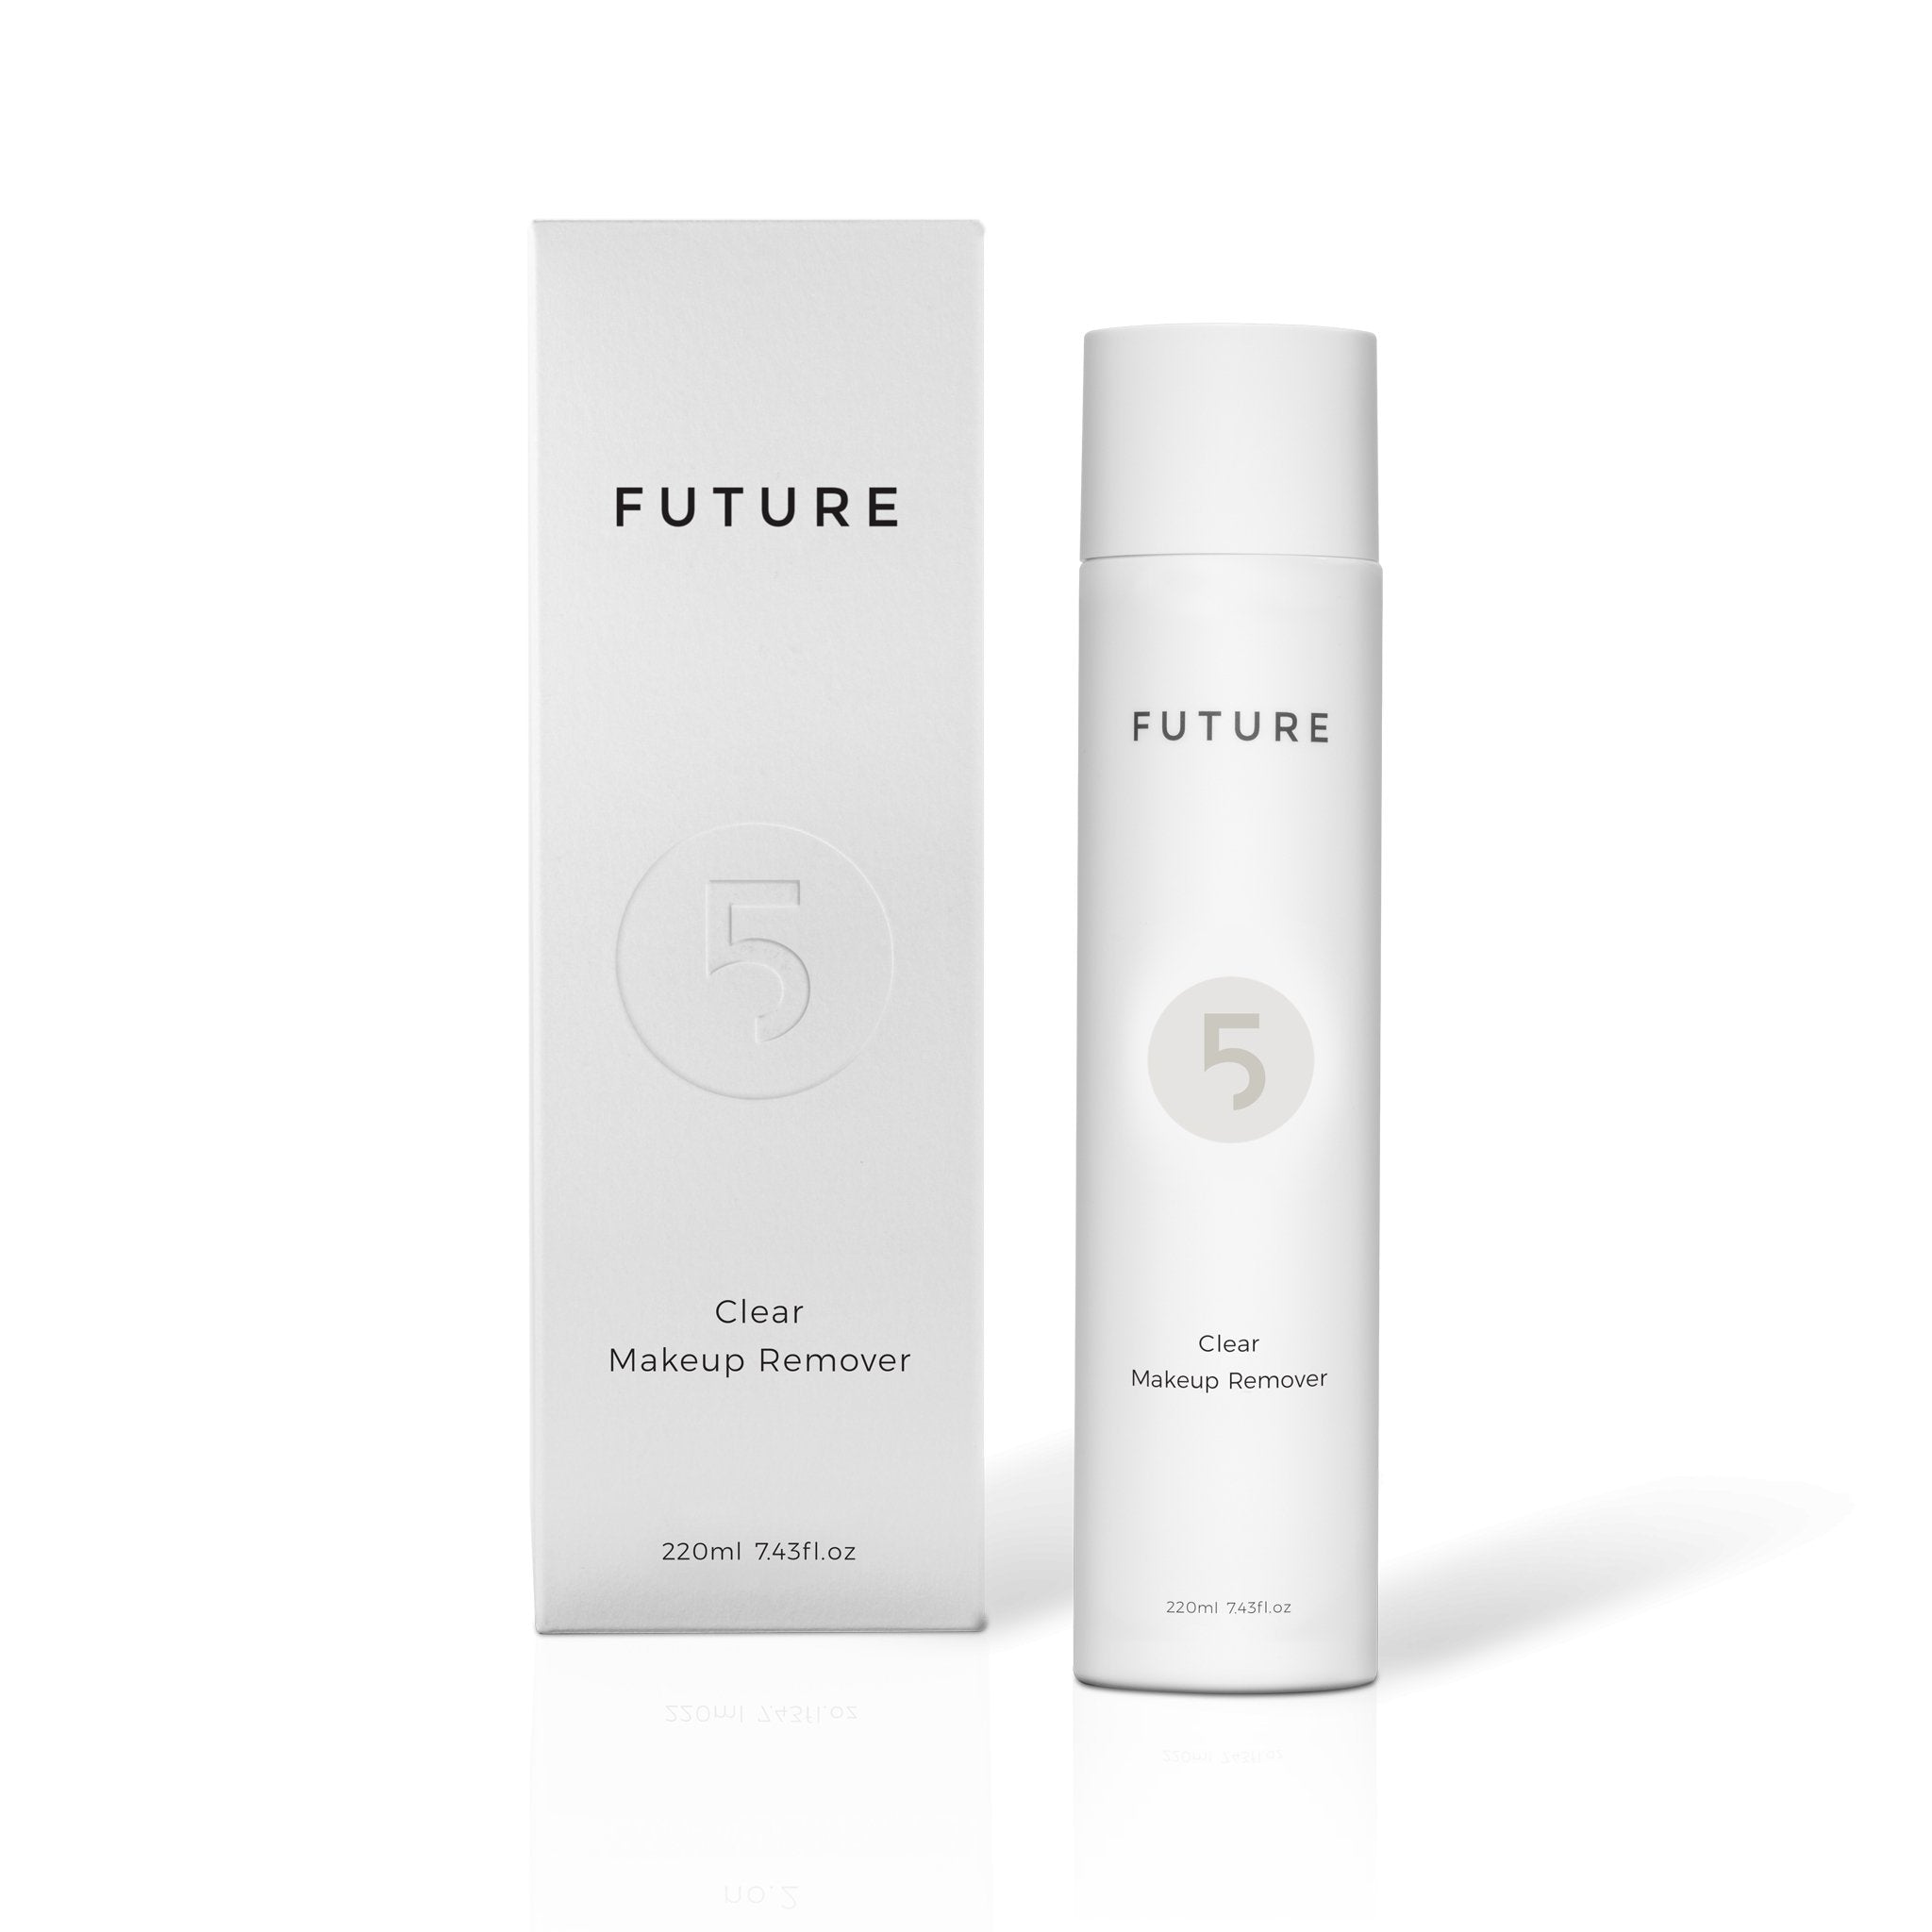 Clear Make Up Remover (Cleansing Milk) - Future Cosmetics The 5 Elements